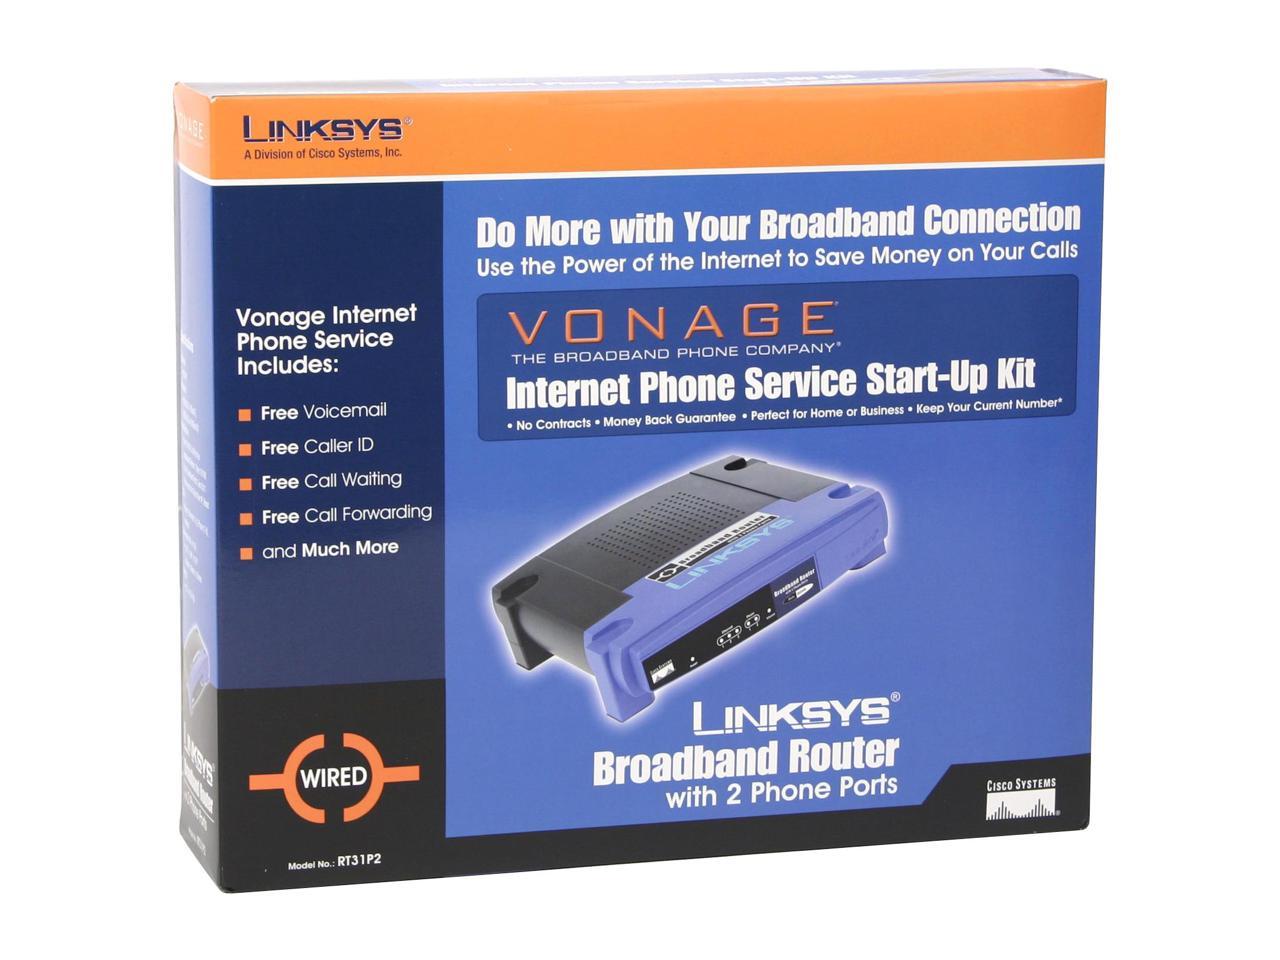 Cisco-Linksys RT31P2 Wired Router for Vonage Internet Phone Service 